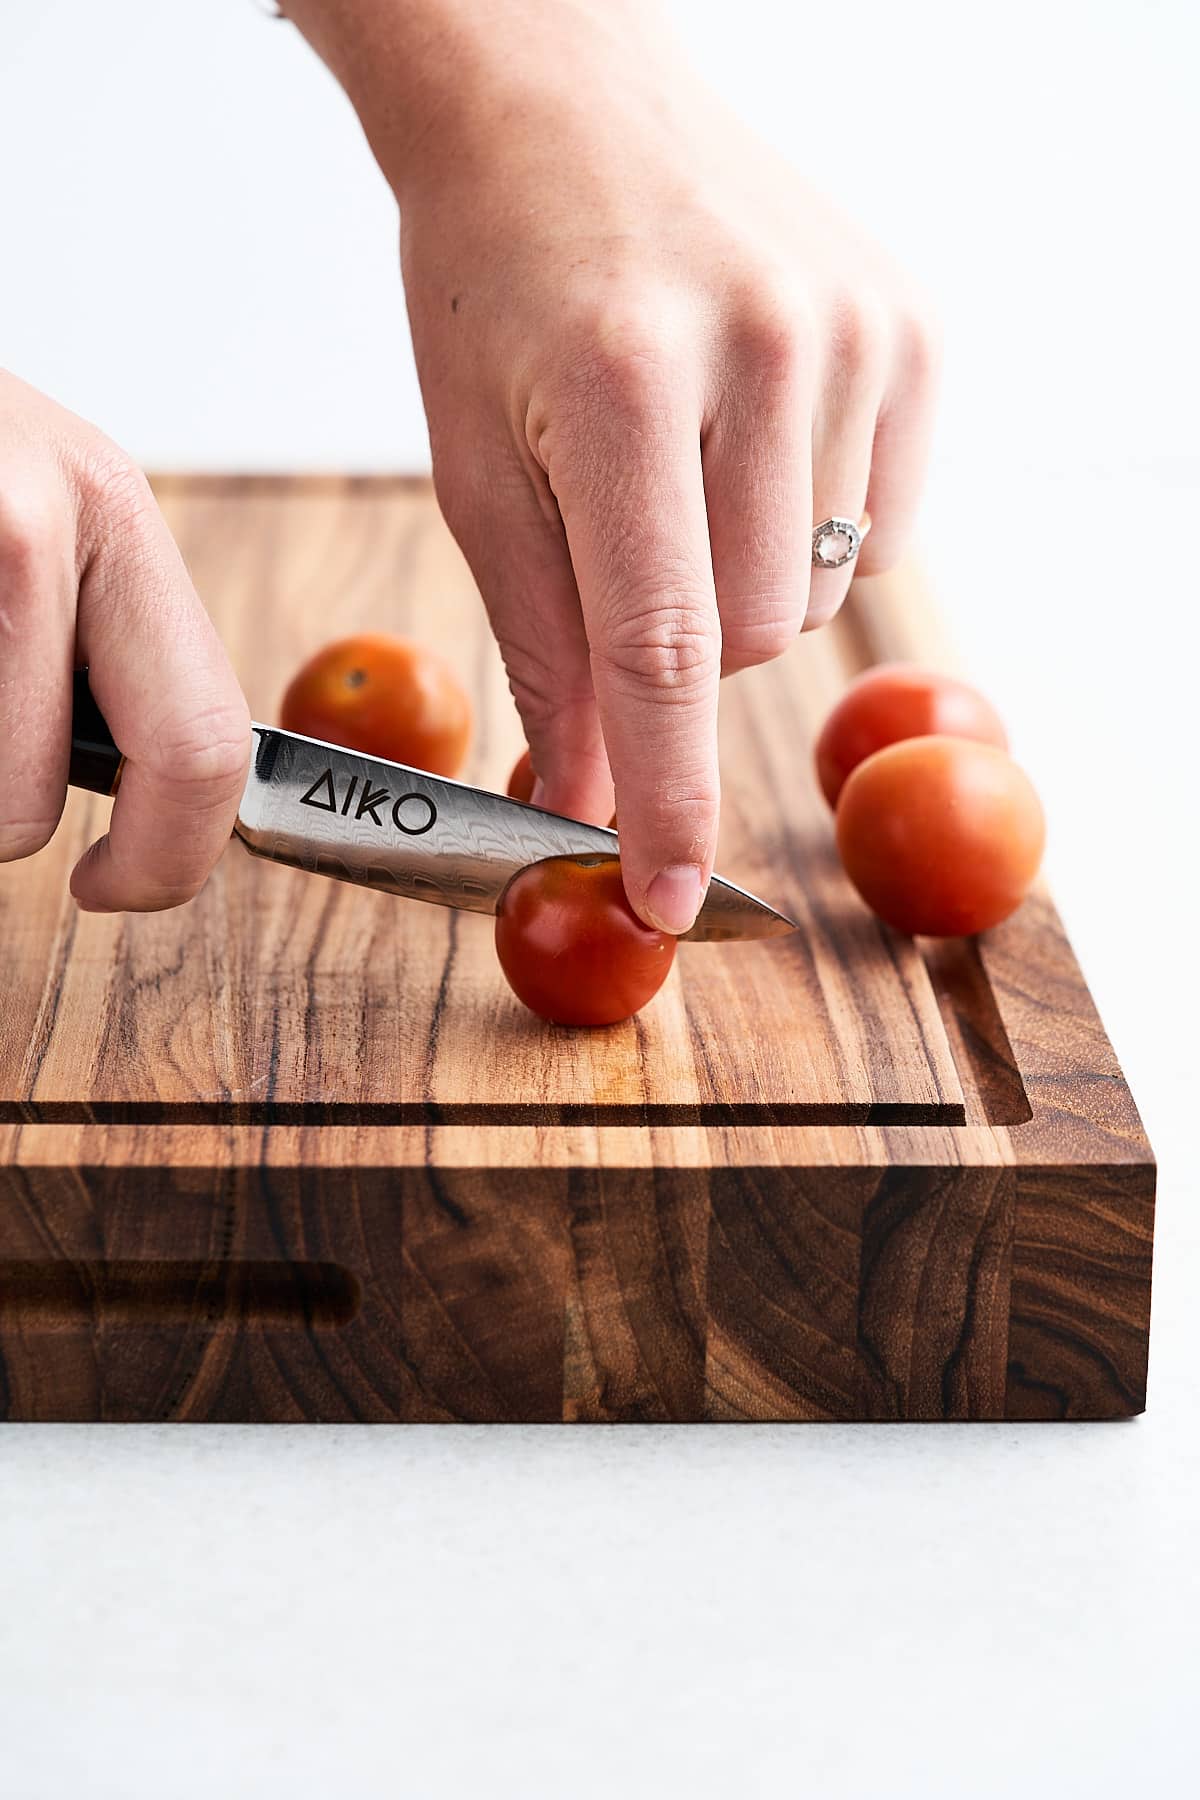 Paring knife slicing a cherry tomato.